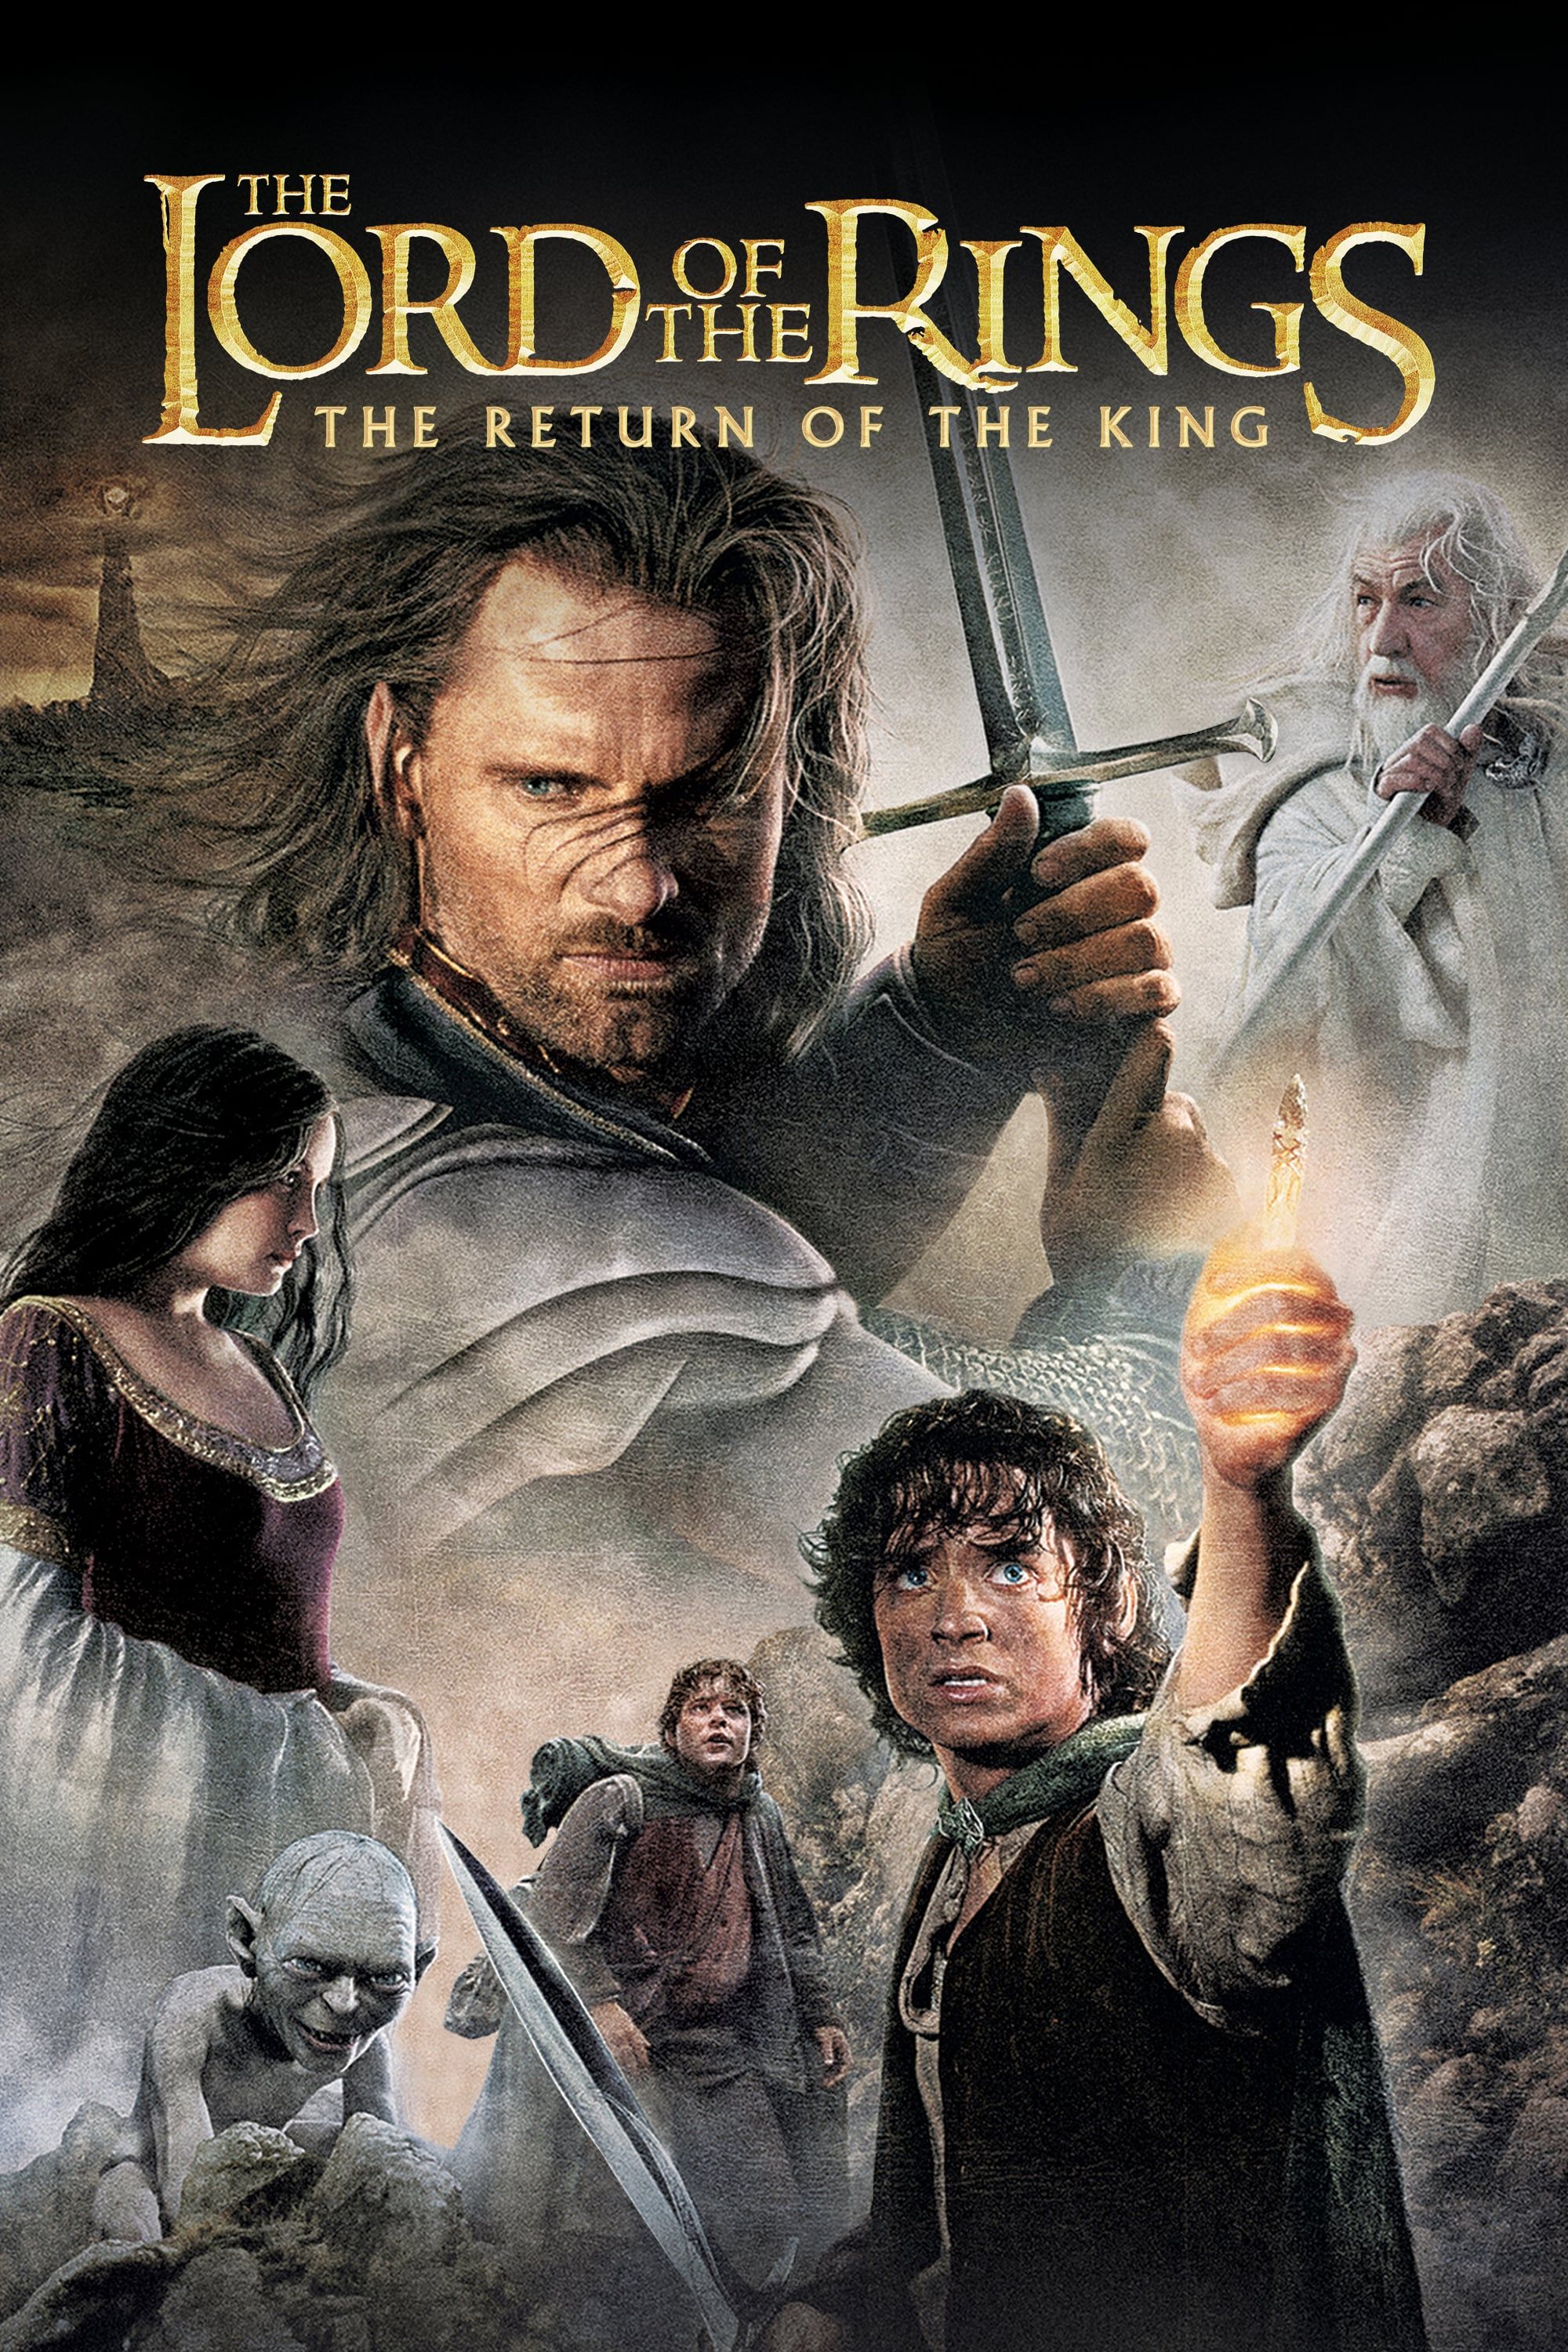 25 Interesting Facts About Lord of the Rings Movie Trilogy – Part 2 |  KickassFacts